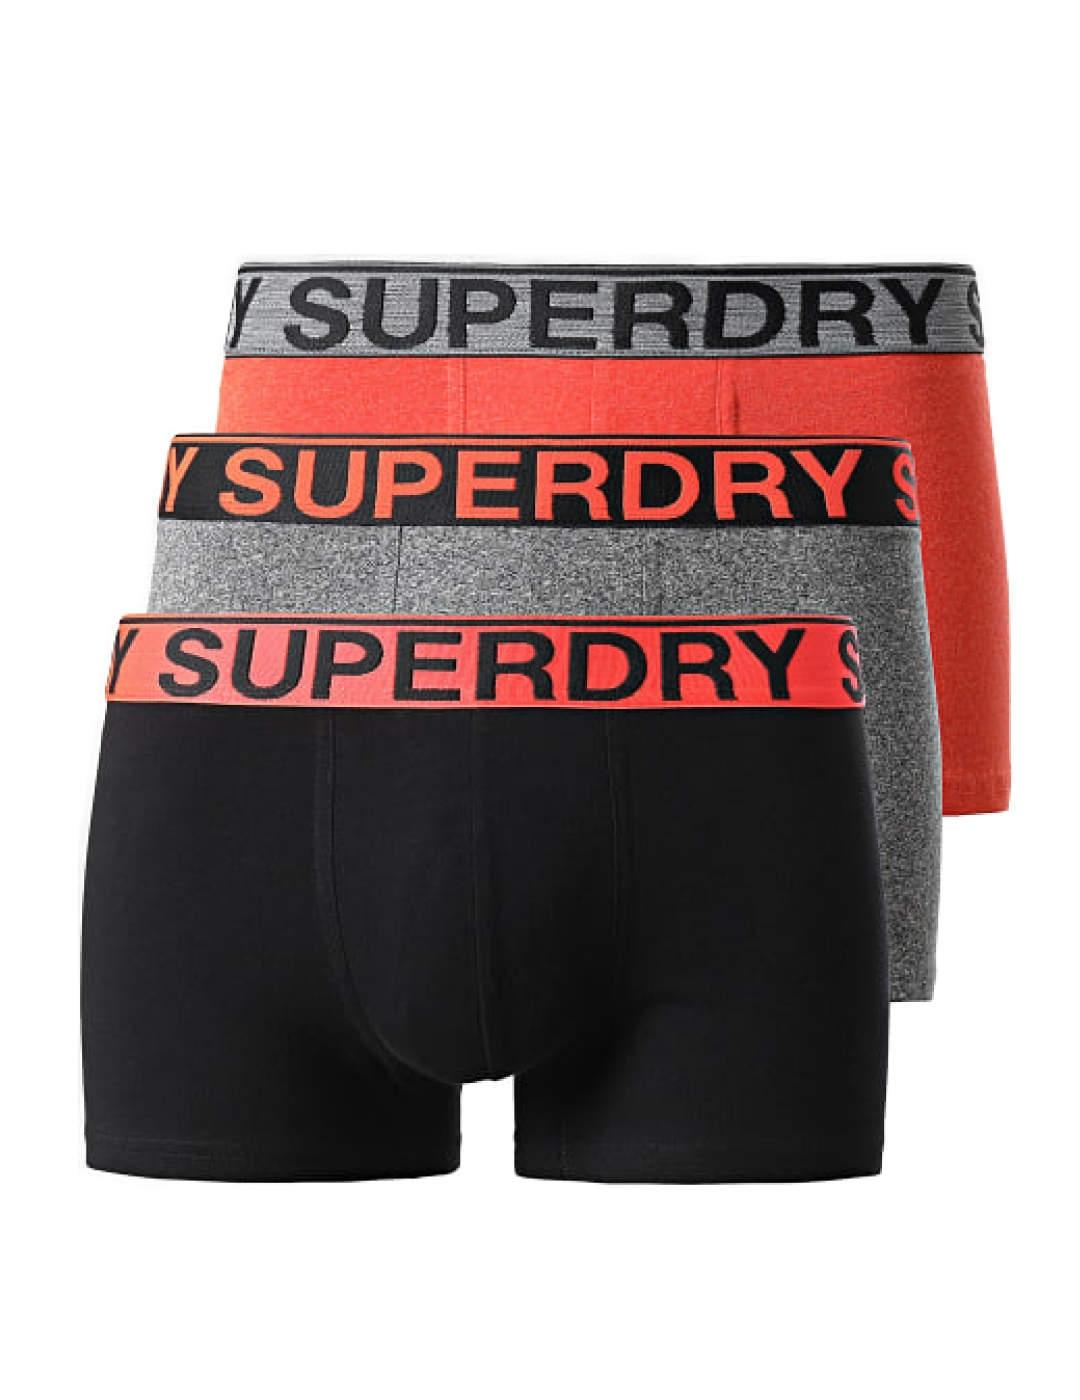 Intimo Superdry pack3 Trunk multicolor hombre